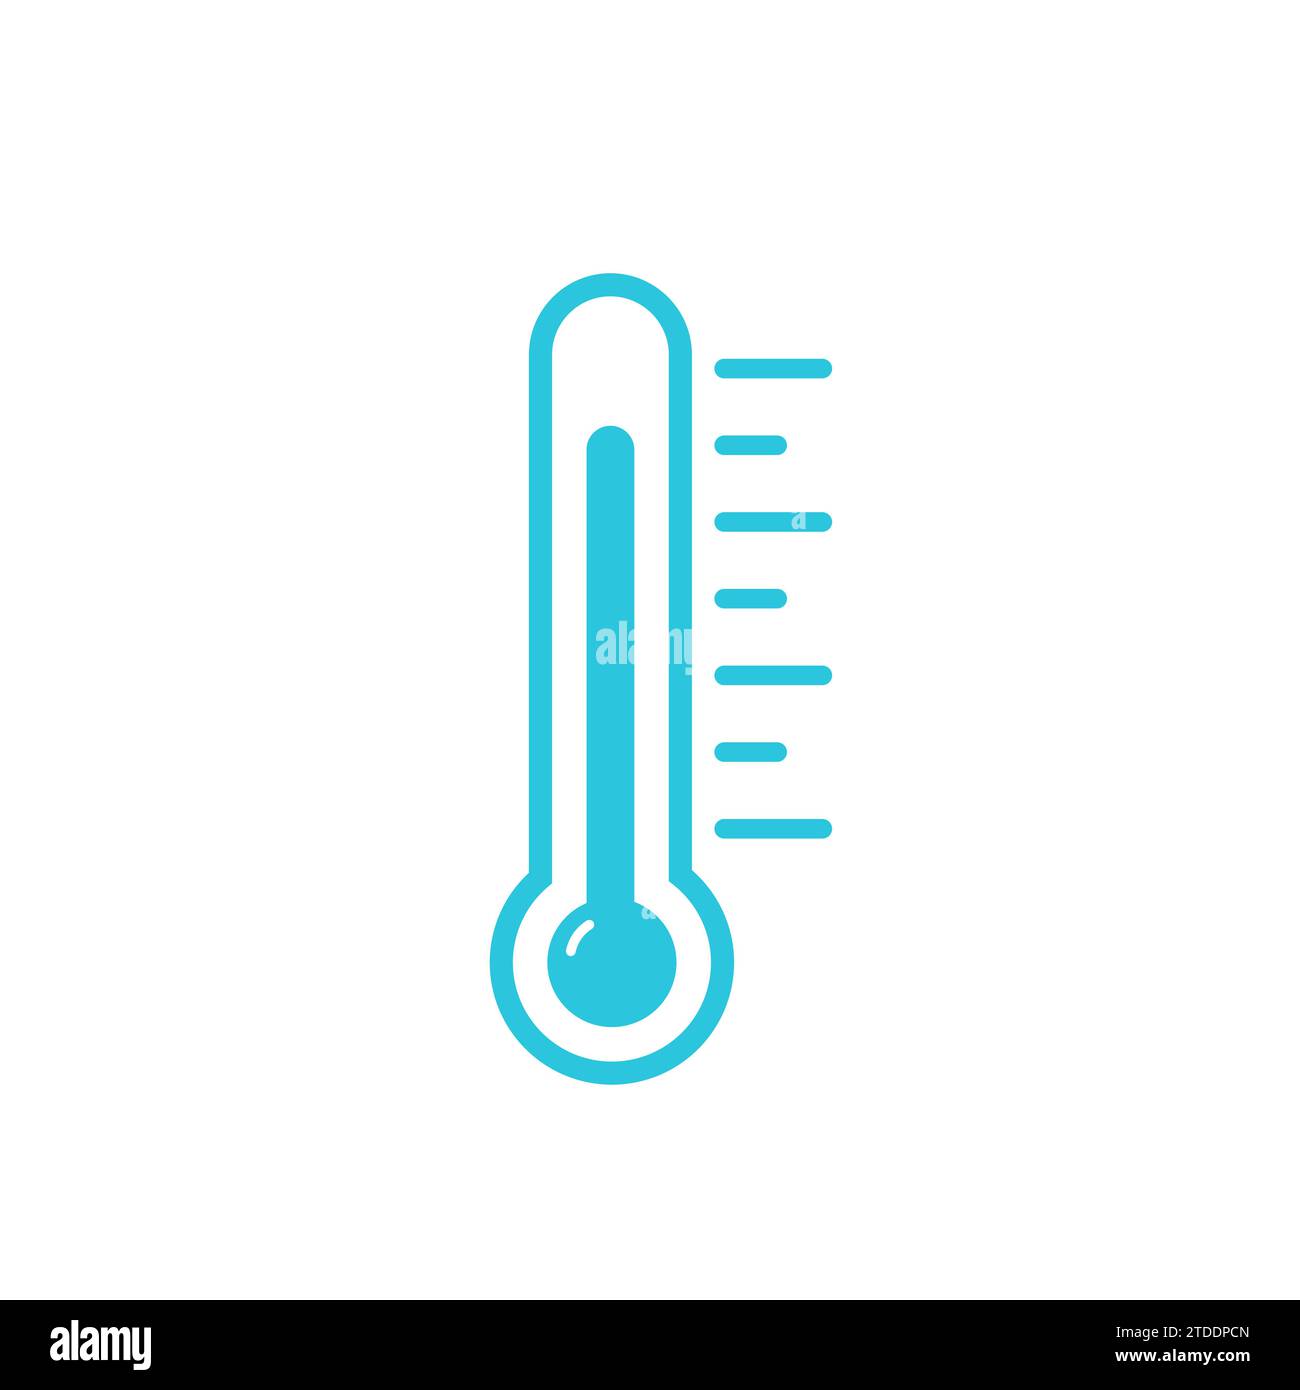 Outdoor thermometer icon. From blue icon set. Stock Vector